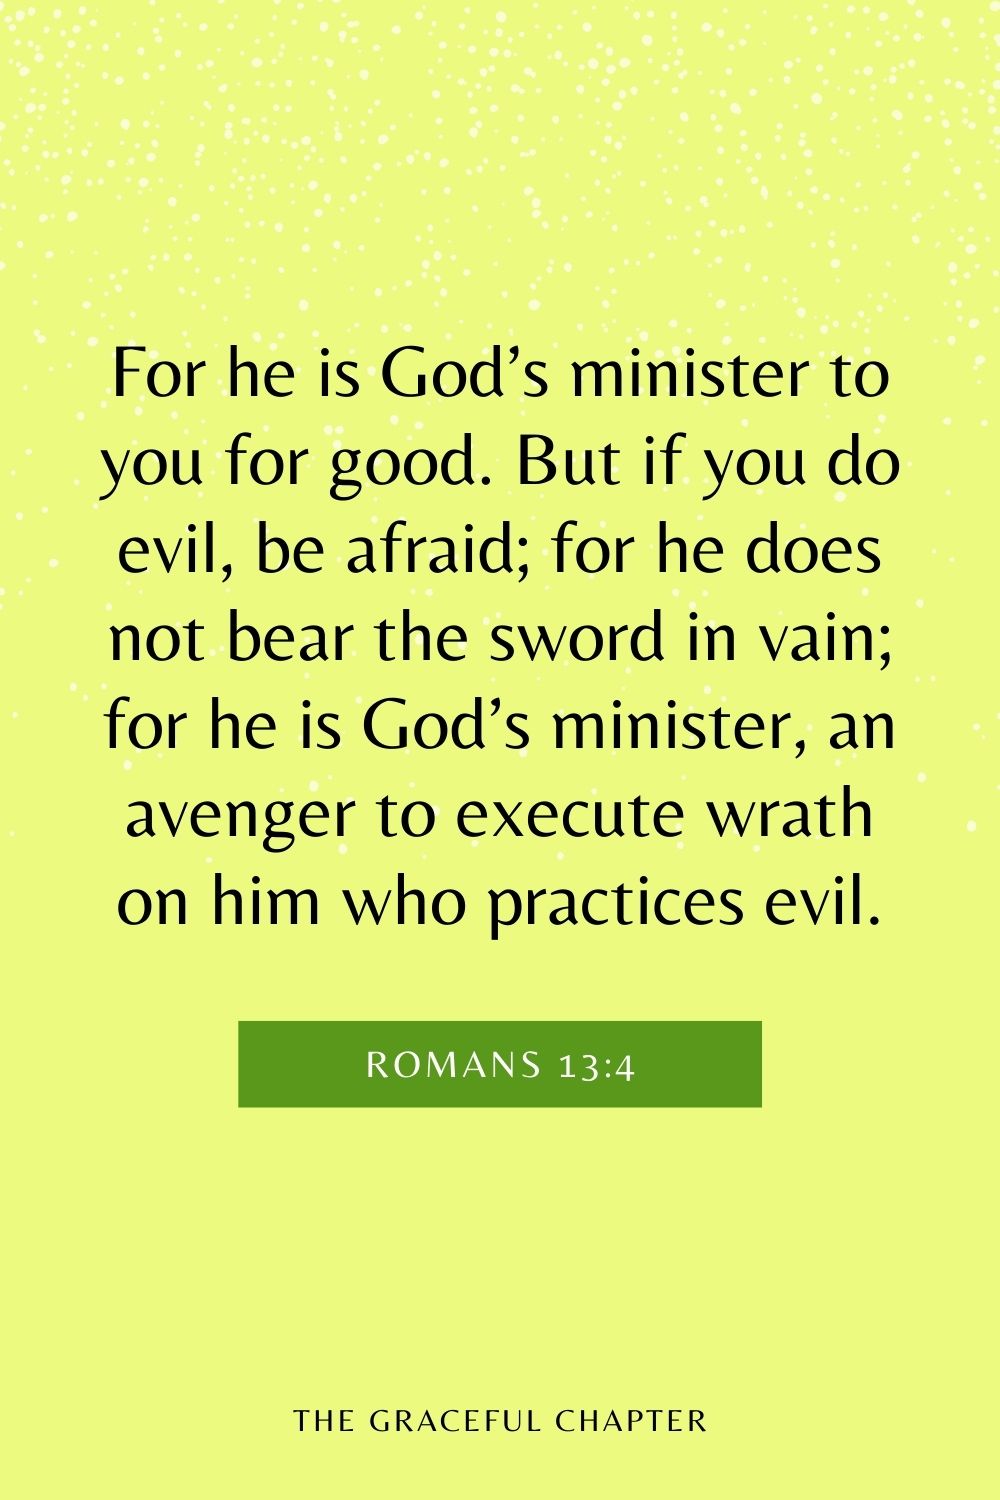 For he is God’s minister to you for good. But if you do evil, be afraid; for he does not bear the sword in vain; for he is God’s minister, an avenger to execute wrath on him who practices evil. Romans 13:4